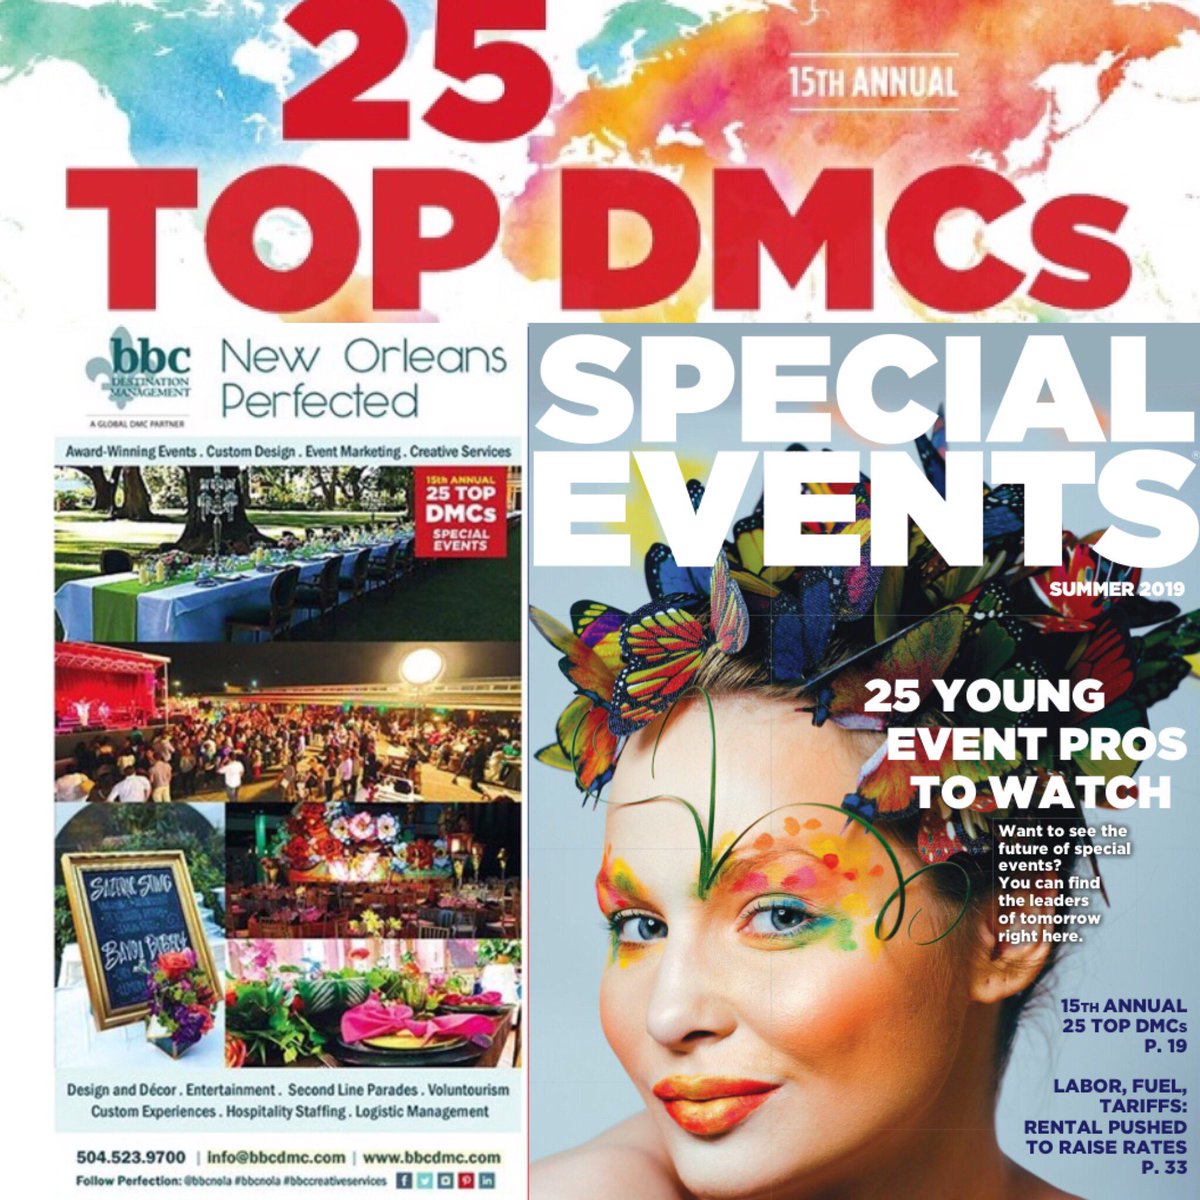 test Twitter Media - We're so honored to be featured in @specialeventsmag 2019 Top 25 DMC list! 🤗💫 Check out our listing in their Summer Digital Edition! ☀️ #dmc #globaldmcpartners #bbcdmc #top25 #eventplanner https://t.co/8gCDuUCTes https://t.co/le03m1YU9v